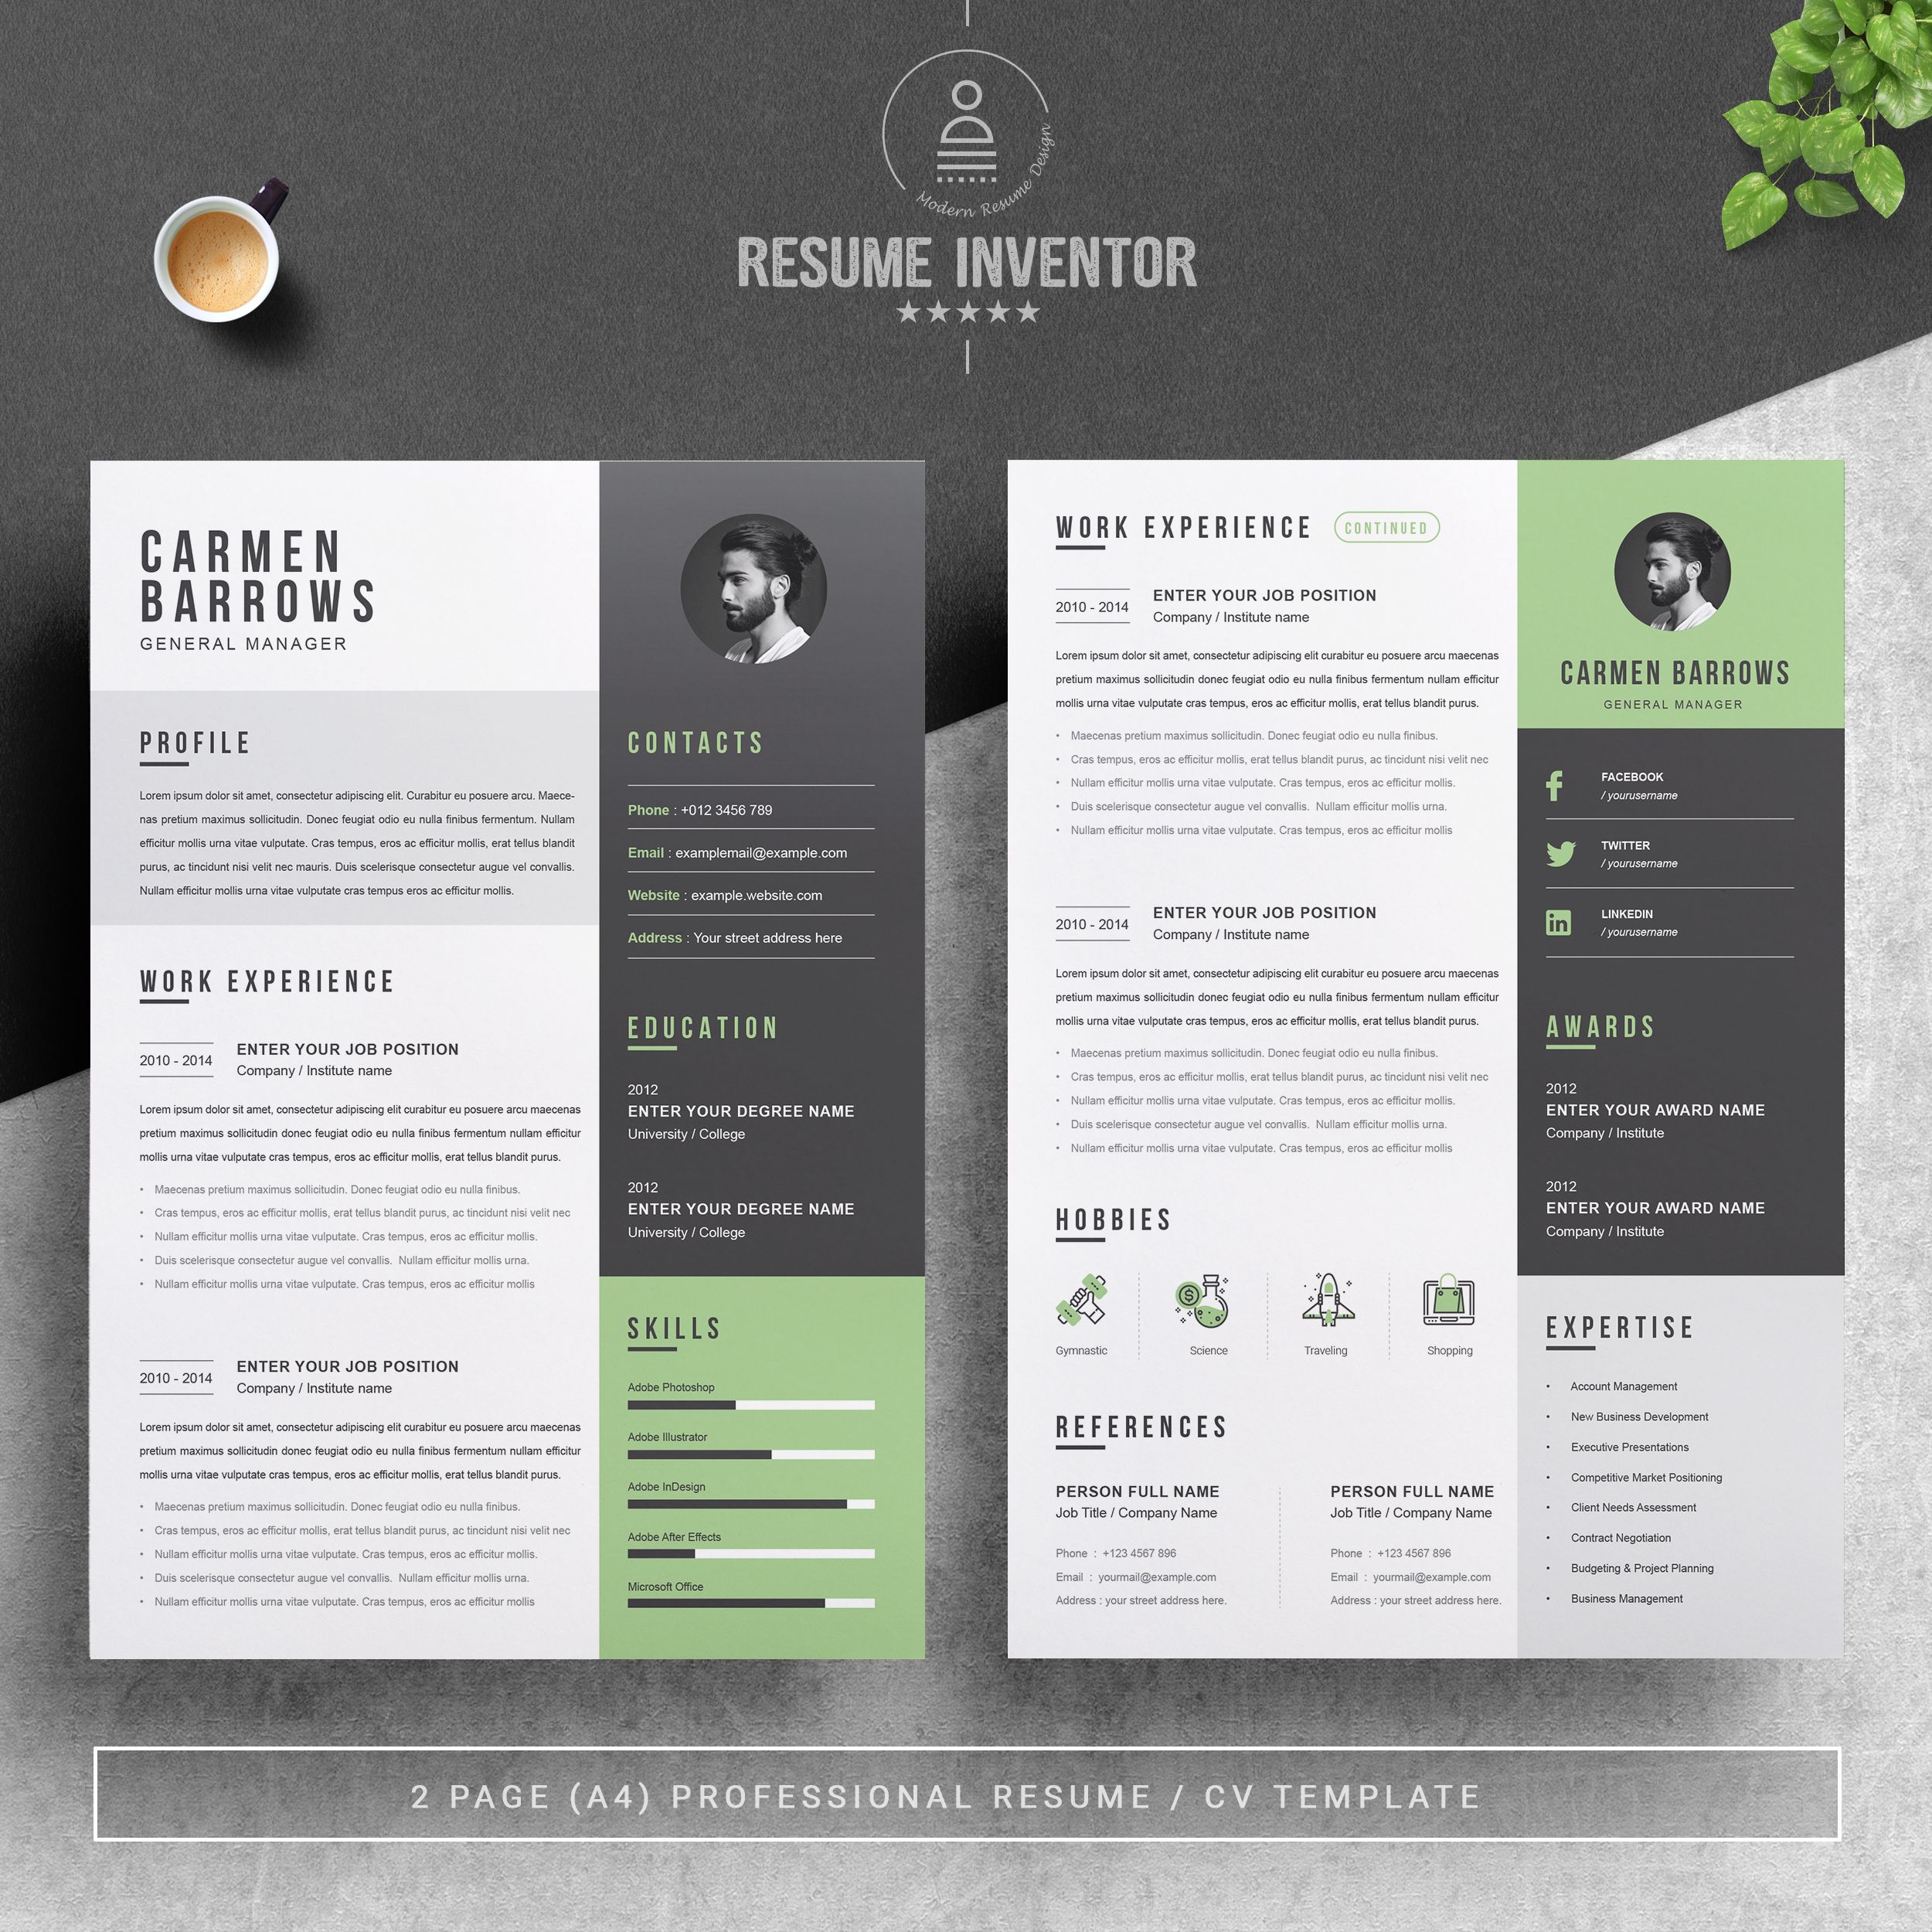 Free Resume Template Psd from www.arch2o.com